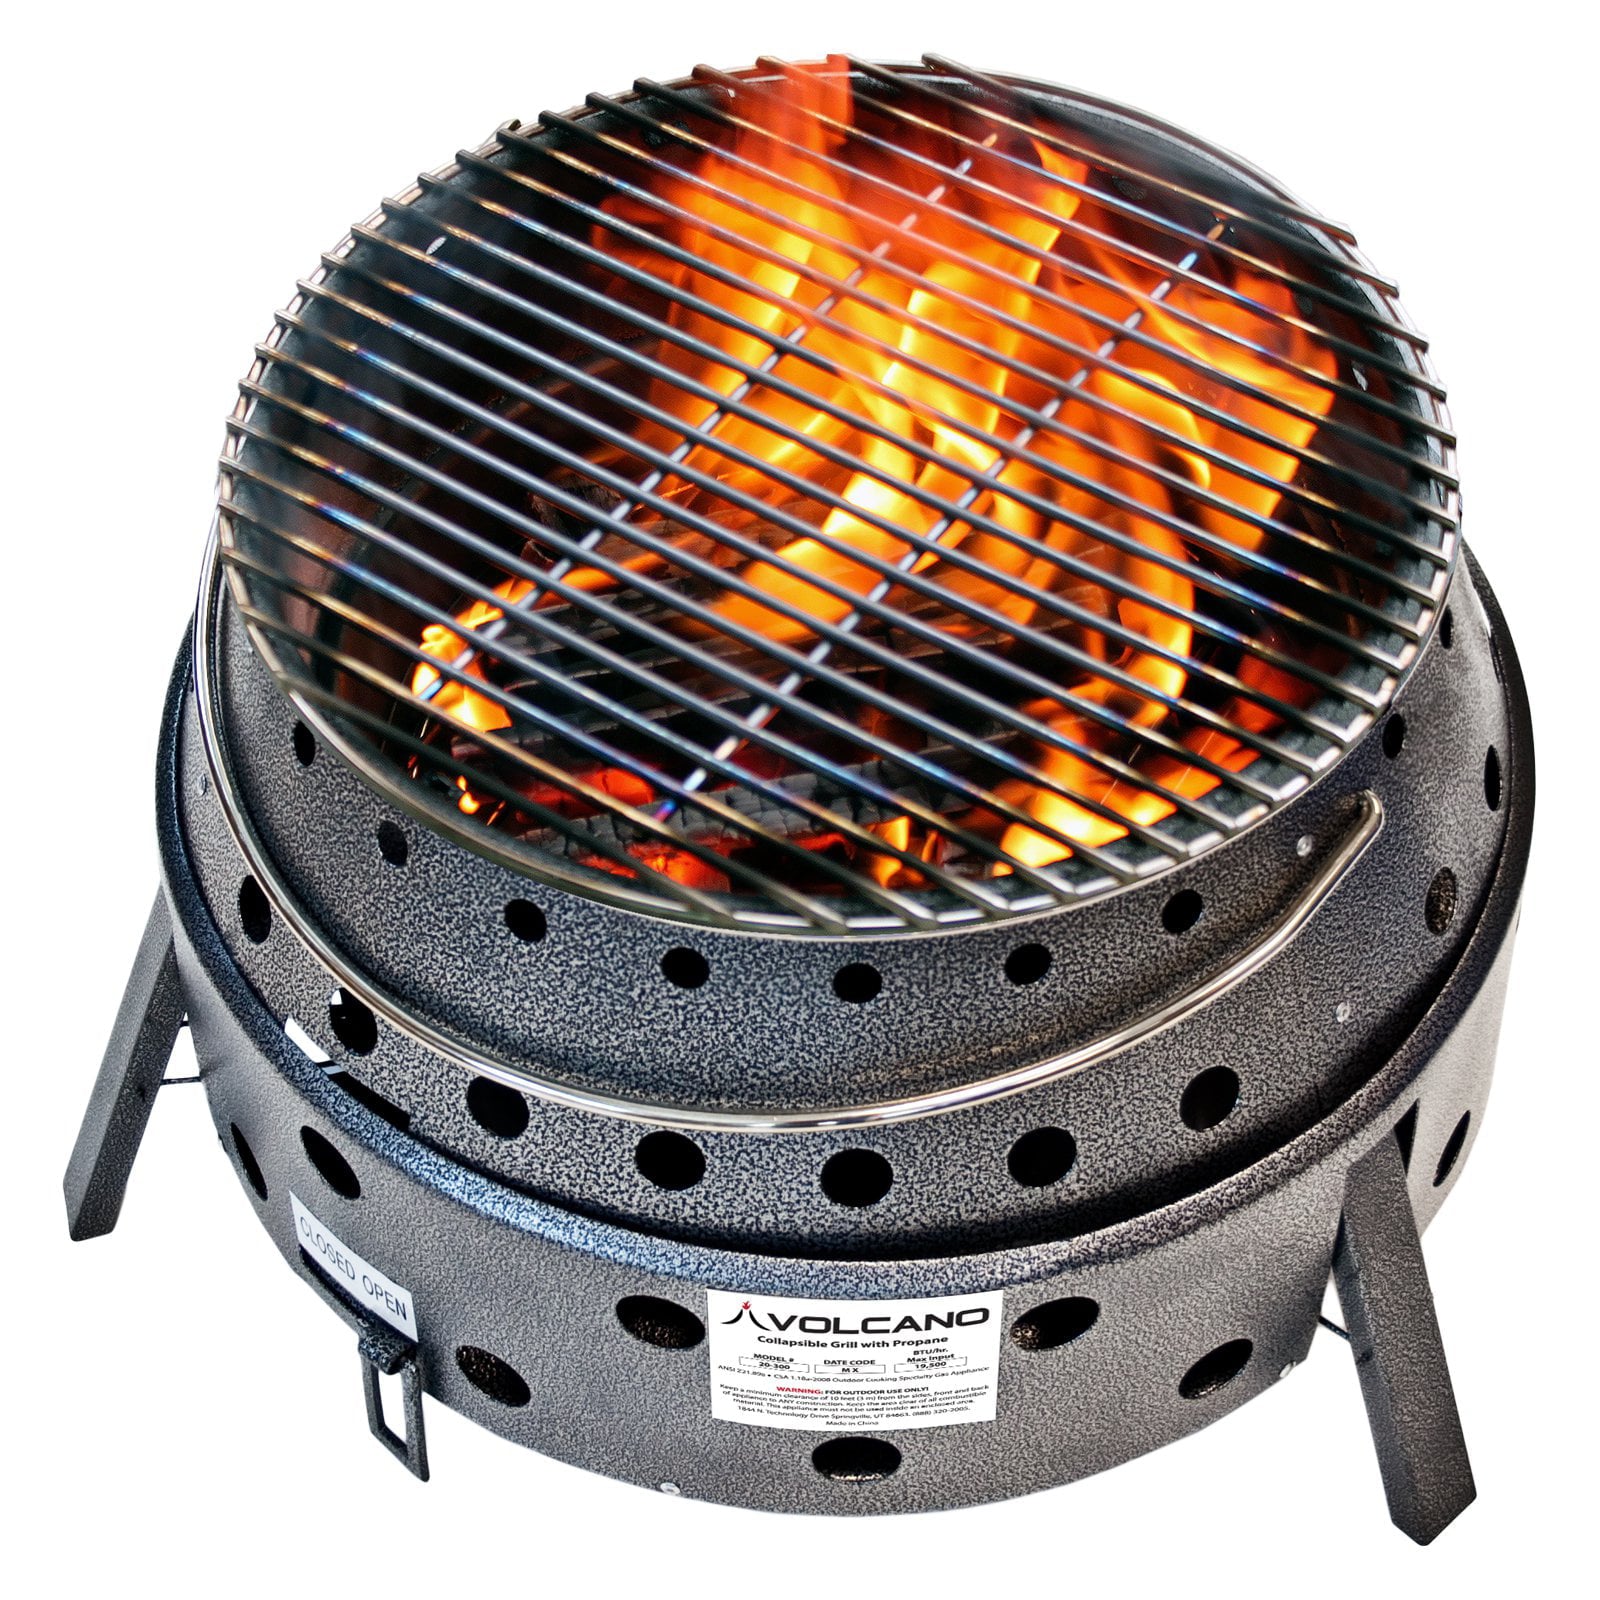 Volcano 2 Collapsible Stove/Grill 20-200